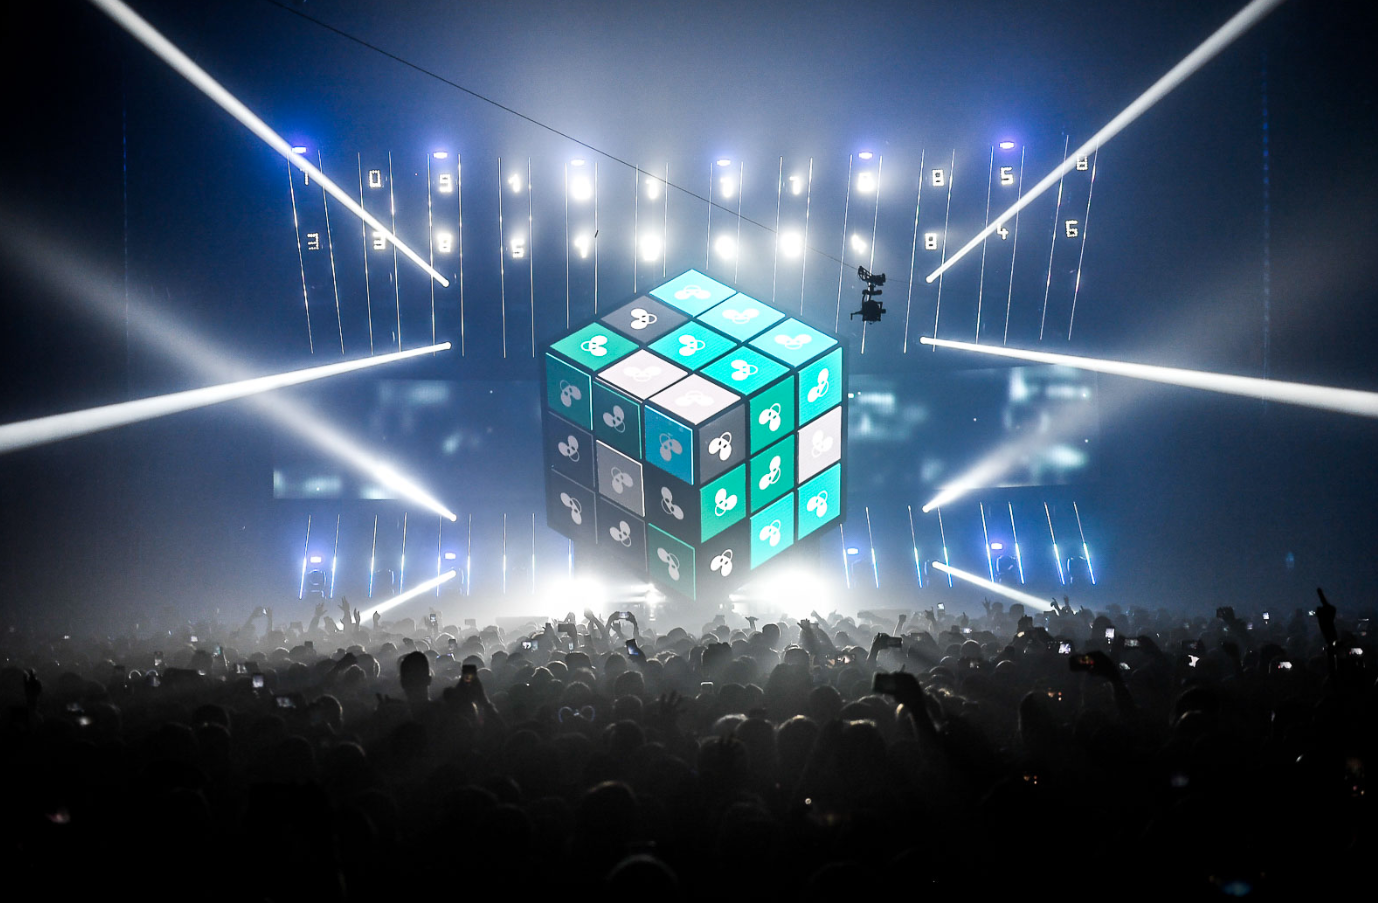 Deadmau5 Rolls Out CUBE V3 Tour At Navy Pier, Rocks The House To Its Core, Literally